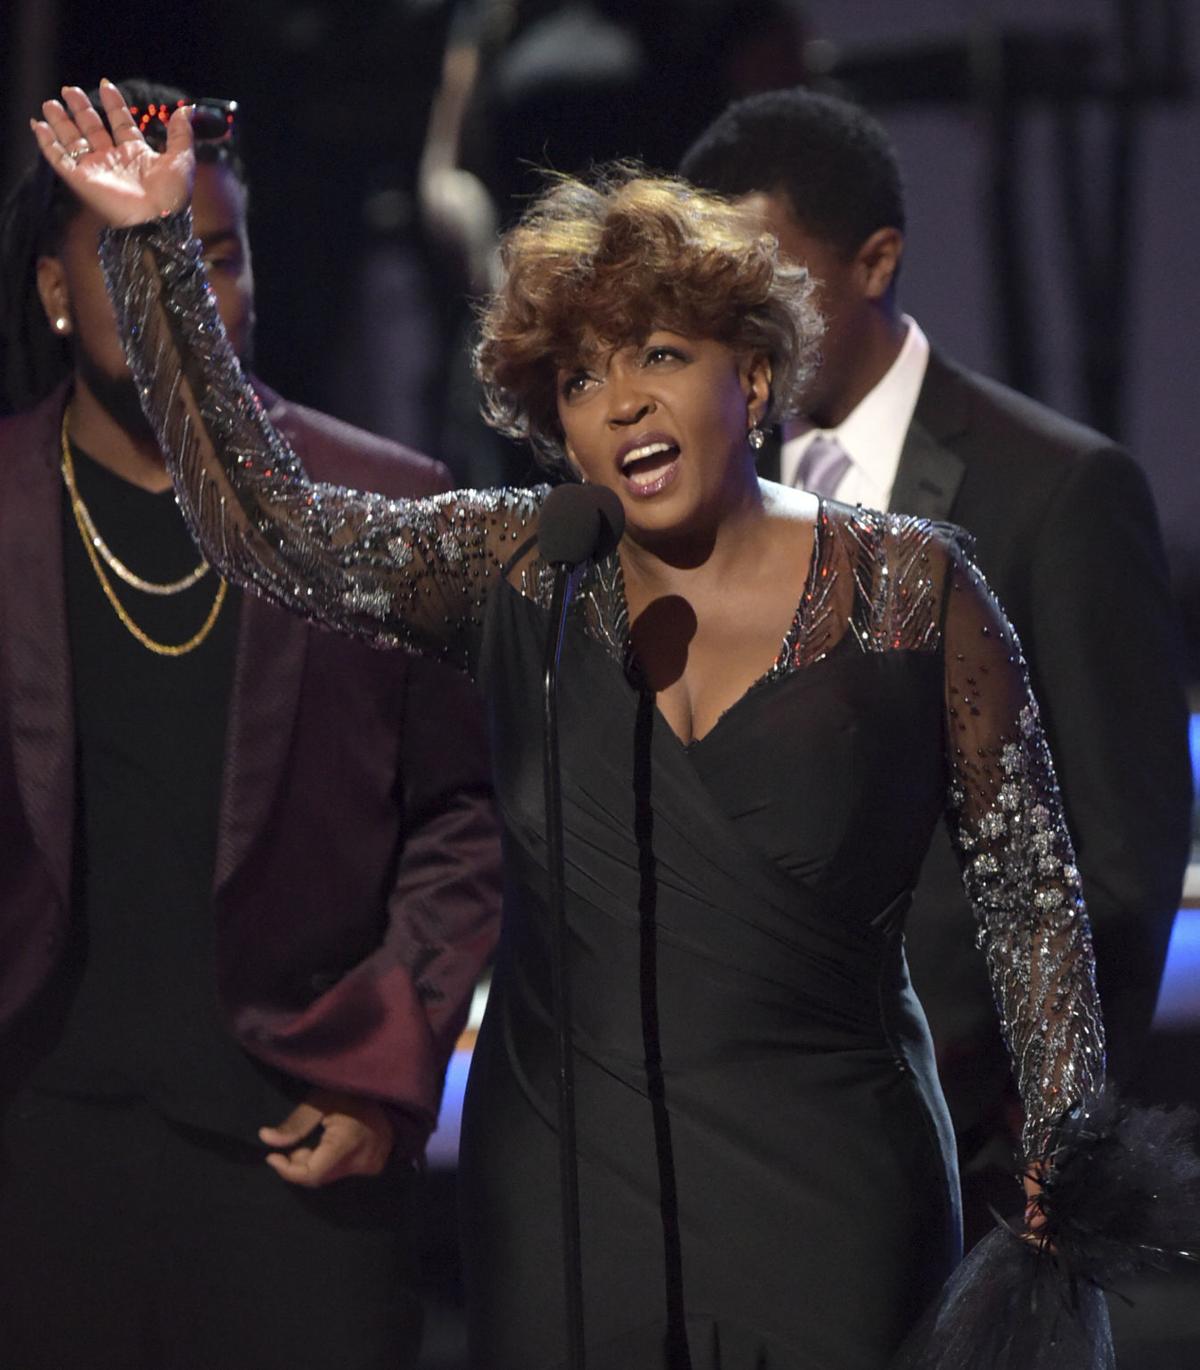 New seats released for Anita Baker's concerts at the Fox Theatre | The